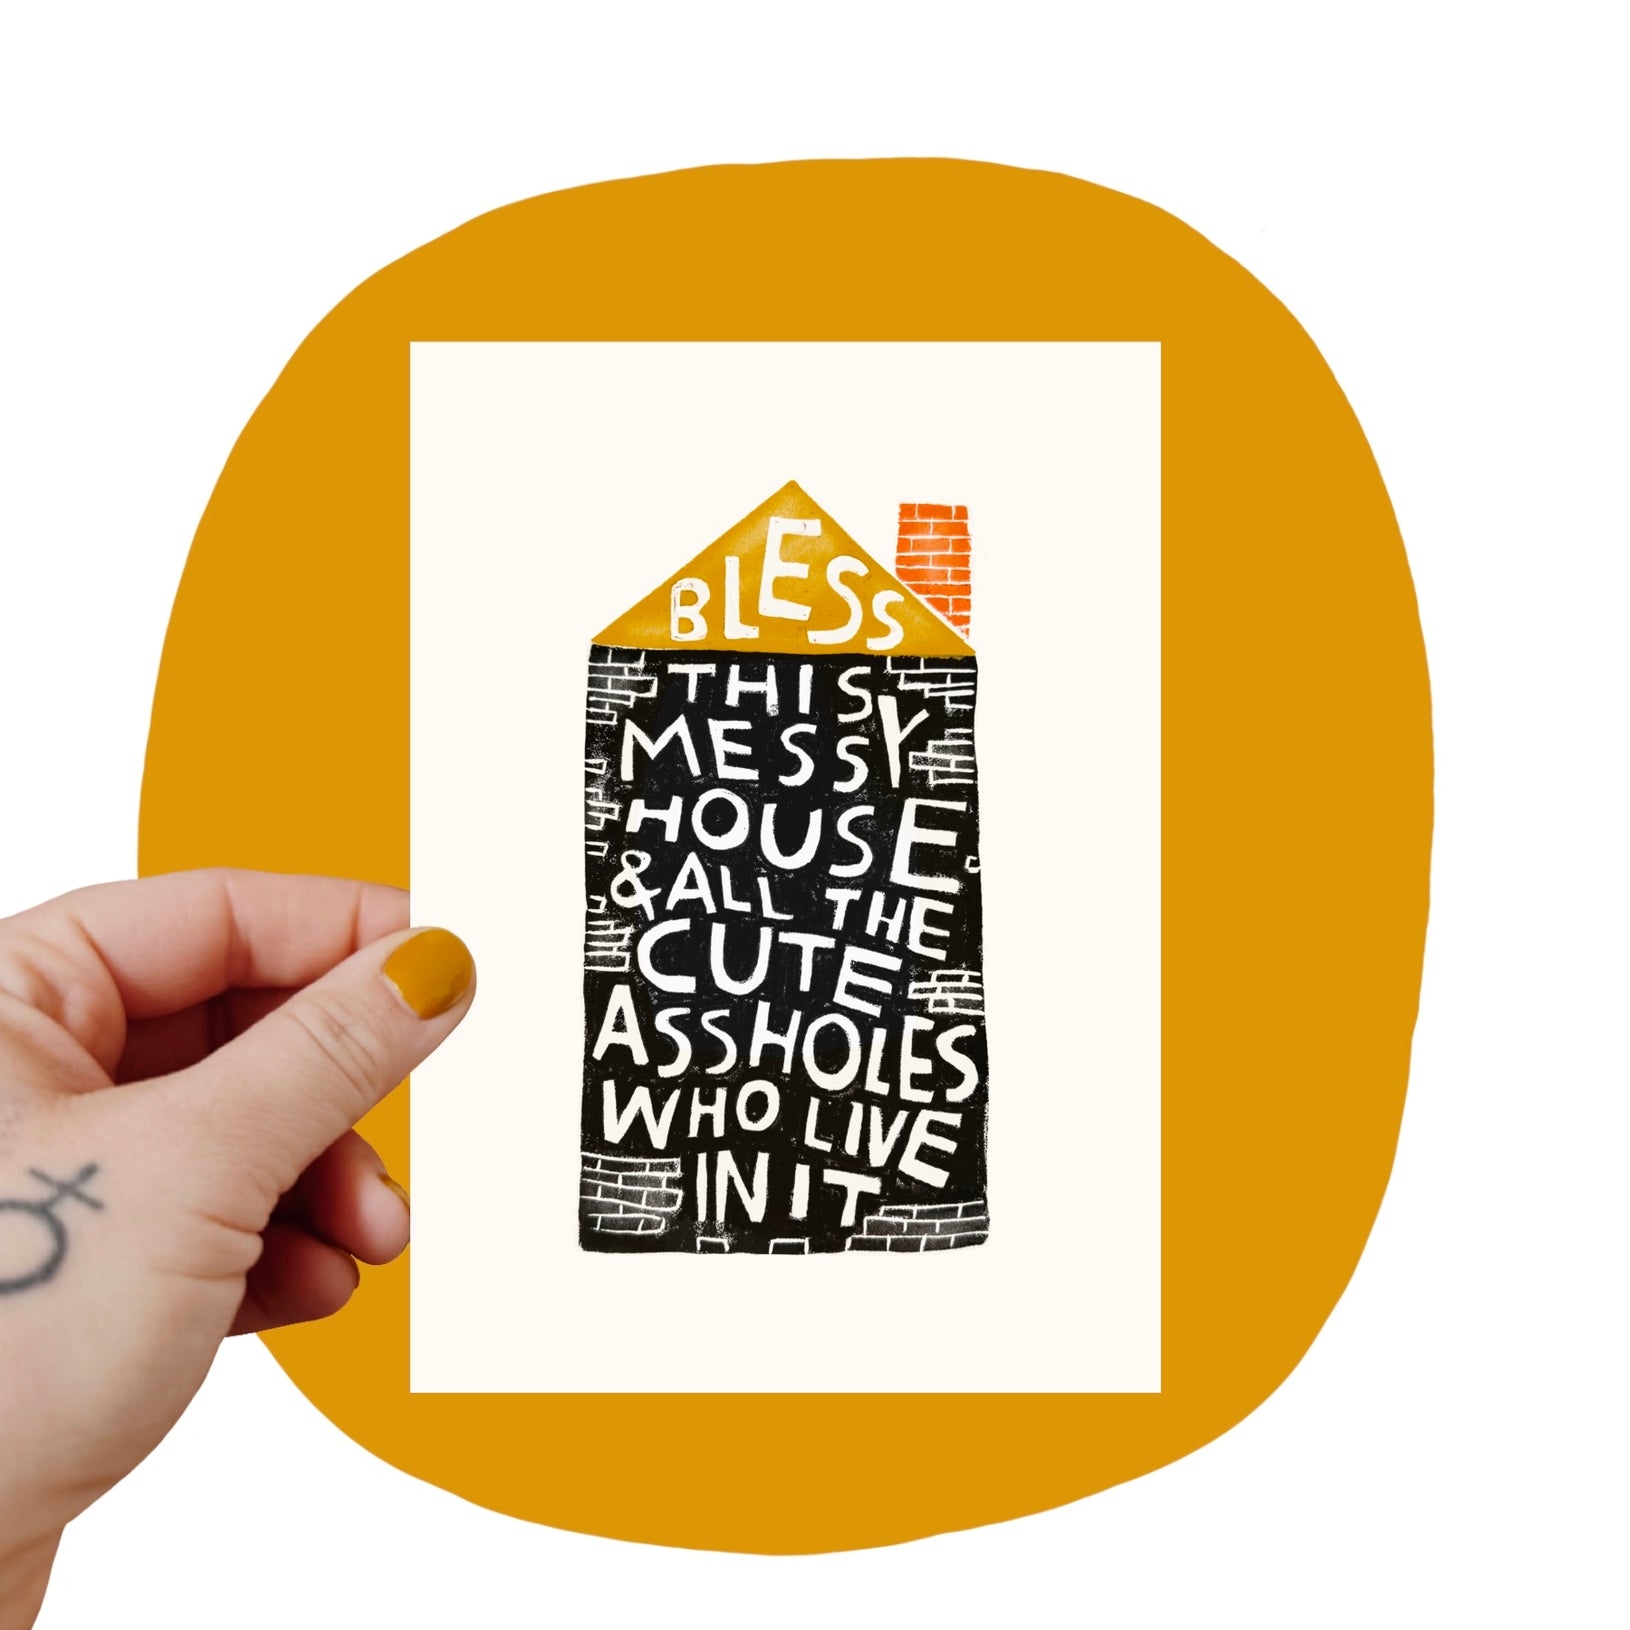 Bless This Messy House Art Print by Rani Ban Co.